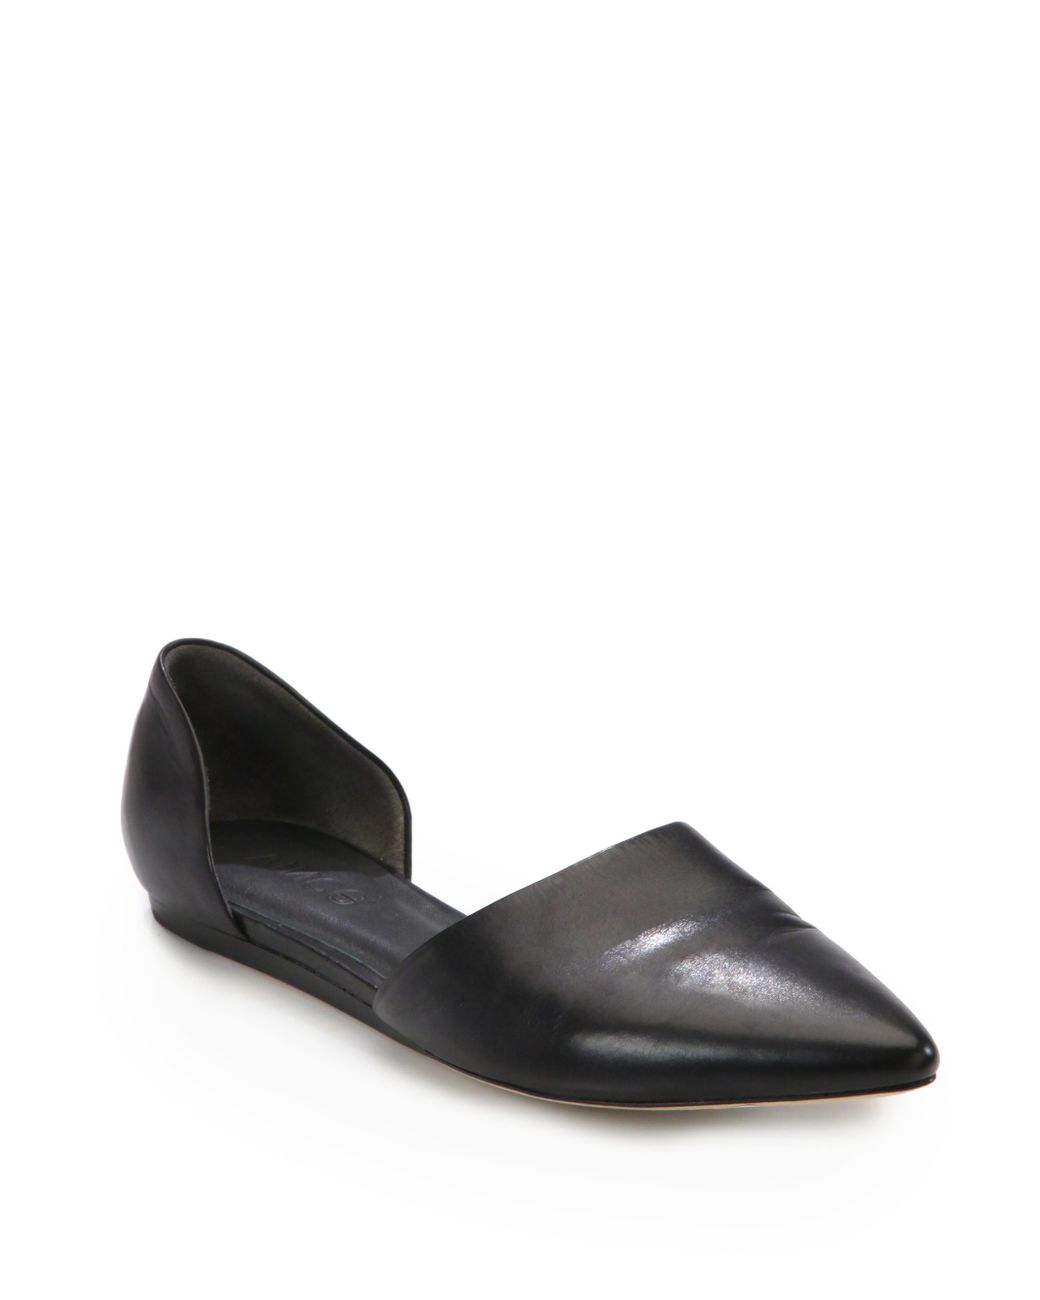 Vince Nina Leather D'orsay Flats in Black | Lyst